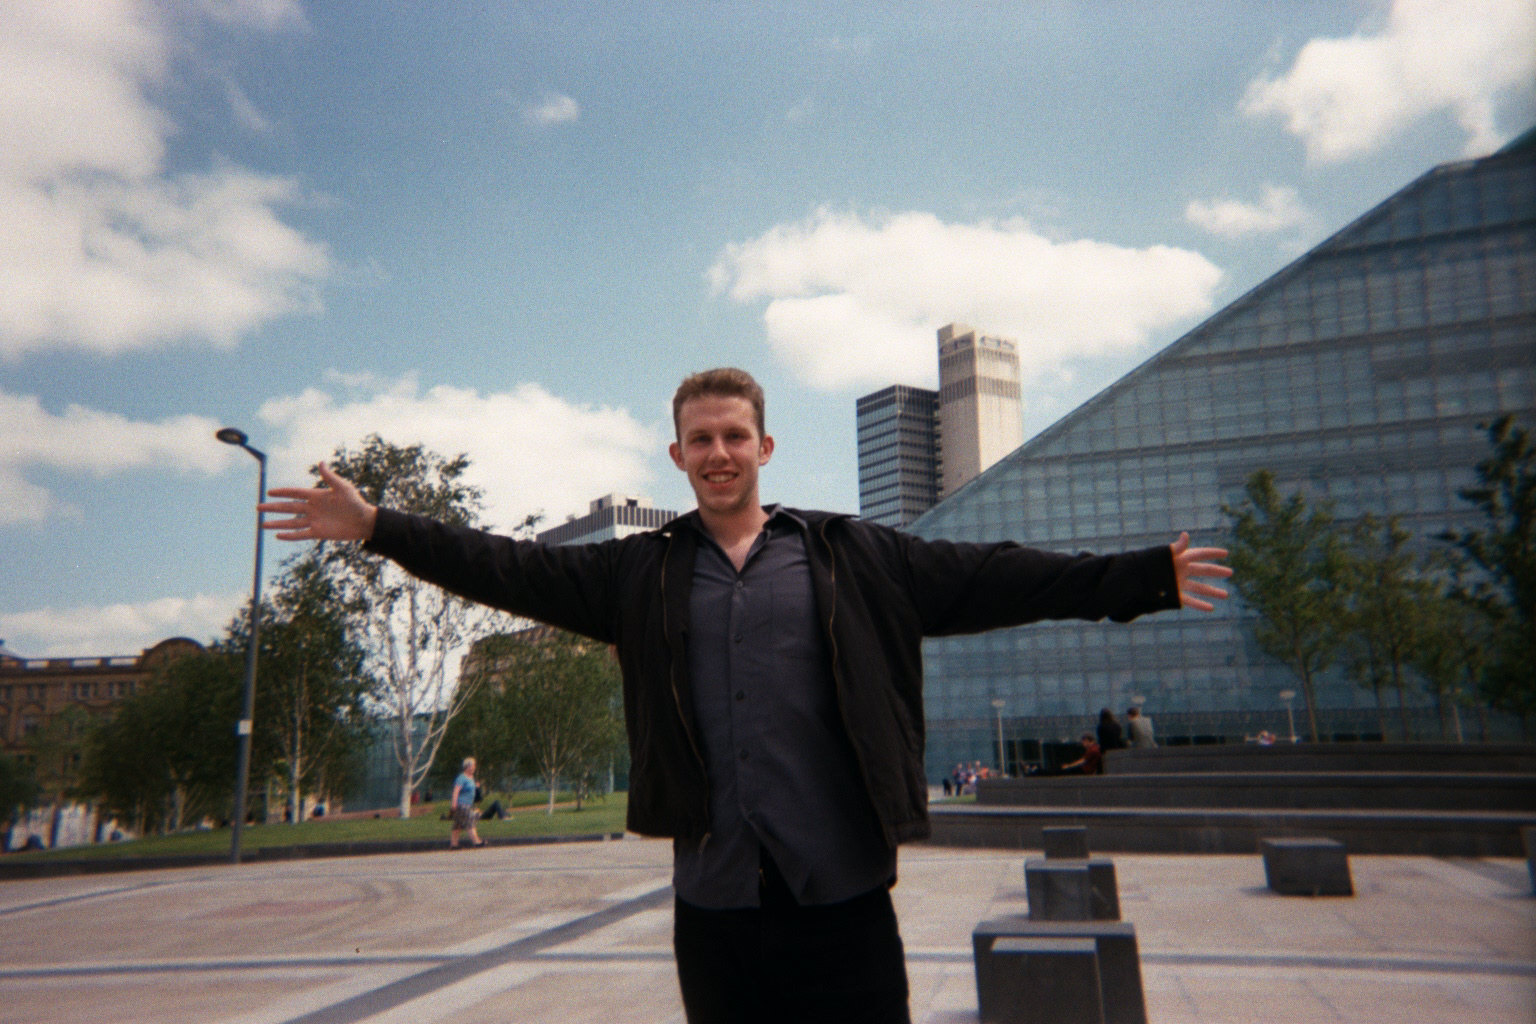 Christian in Cathedral Gardens, Manchester